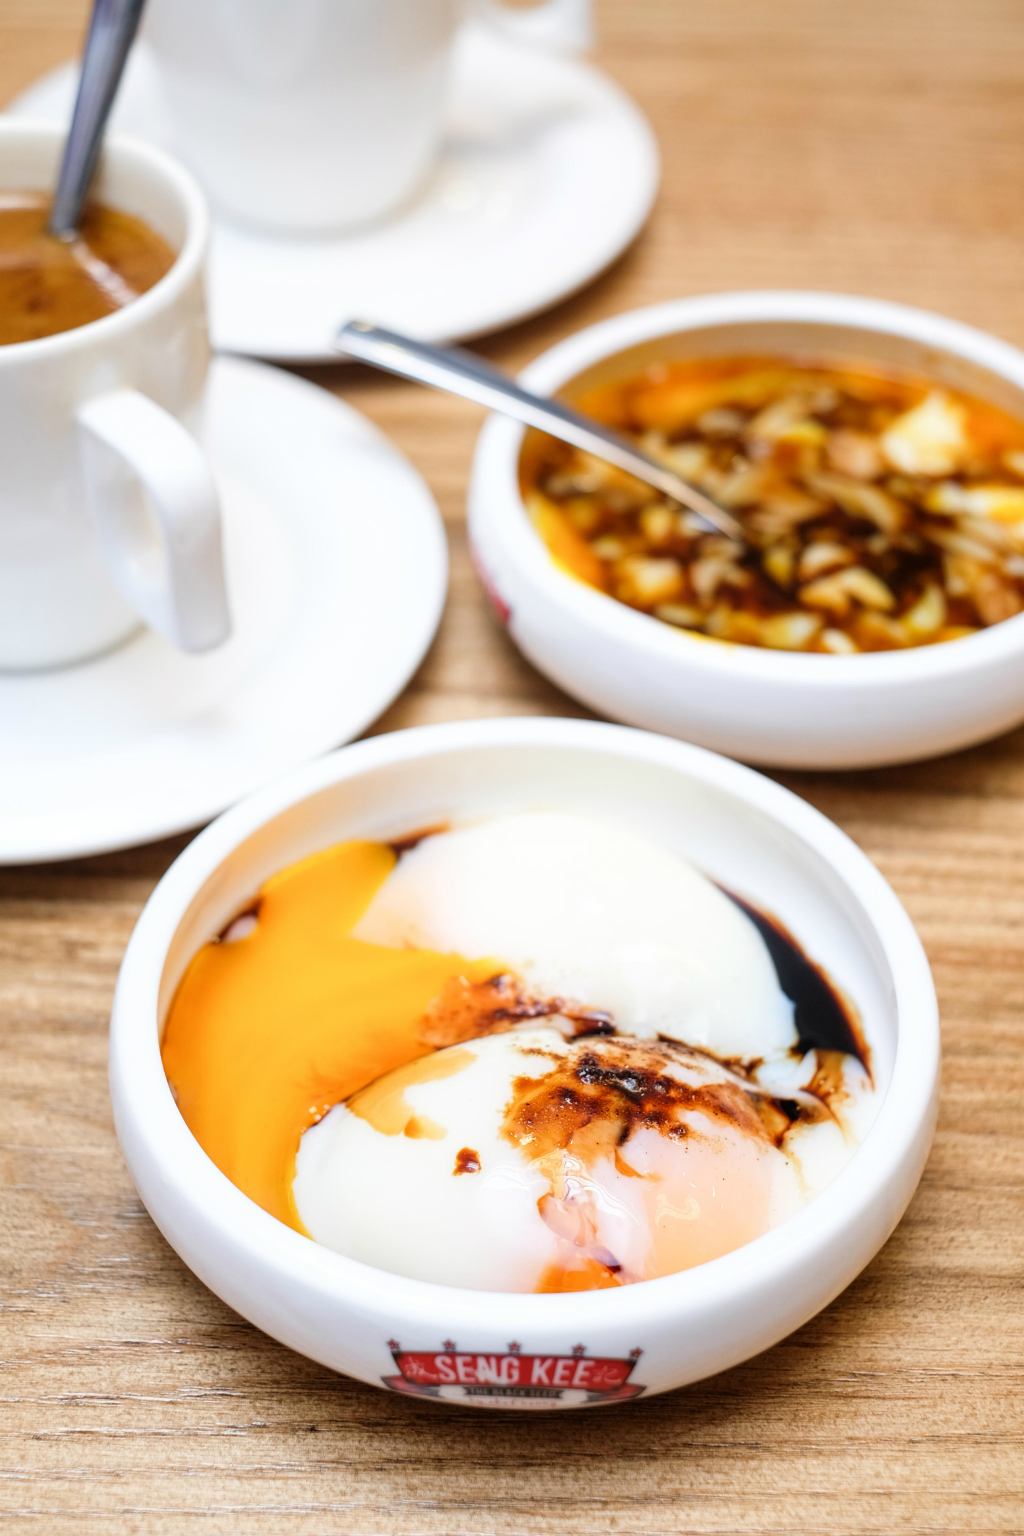 Seng Kee The Black Seed by Chef Benny's 63°C soft boil eggs